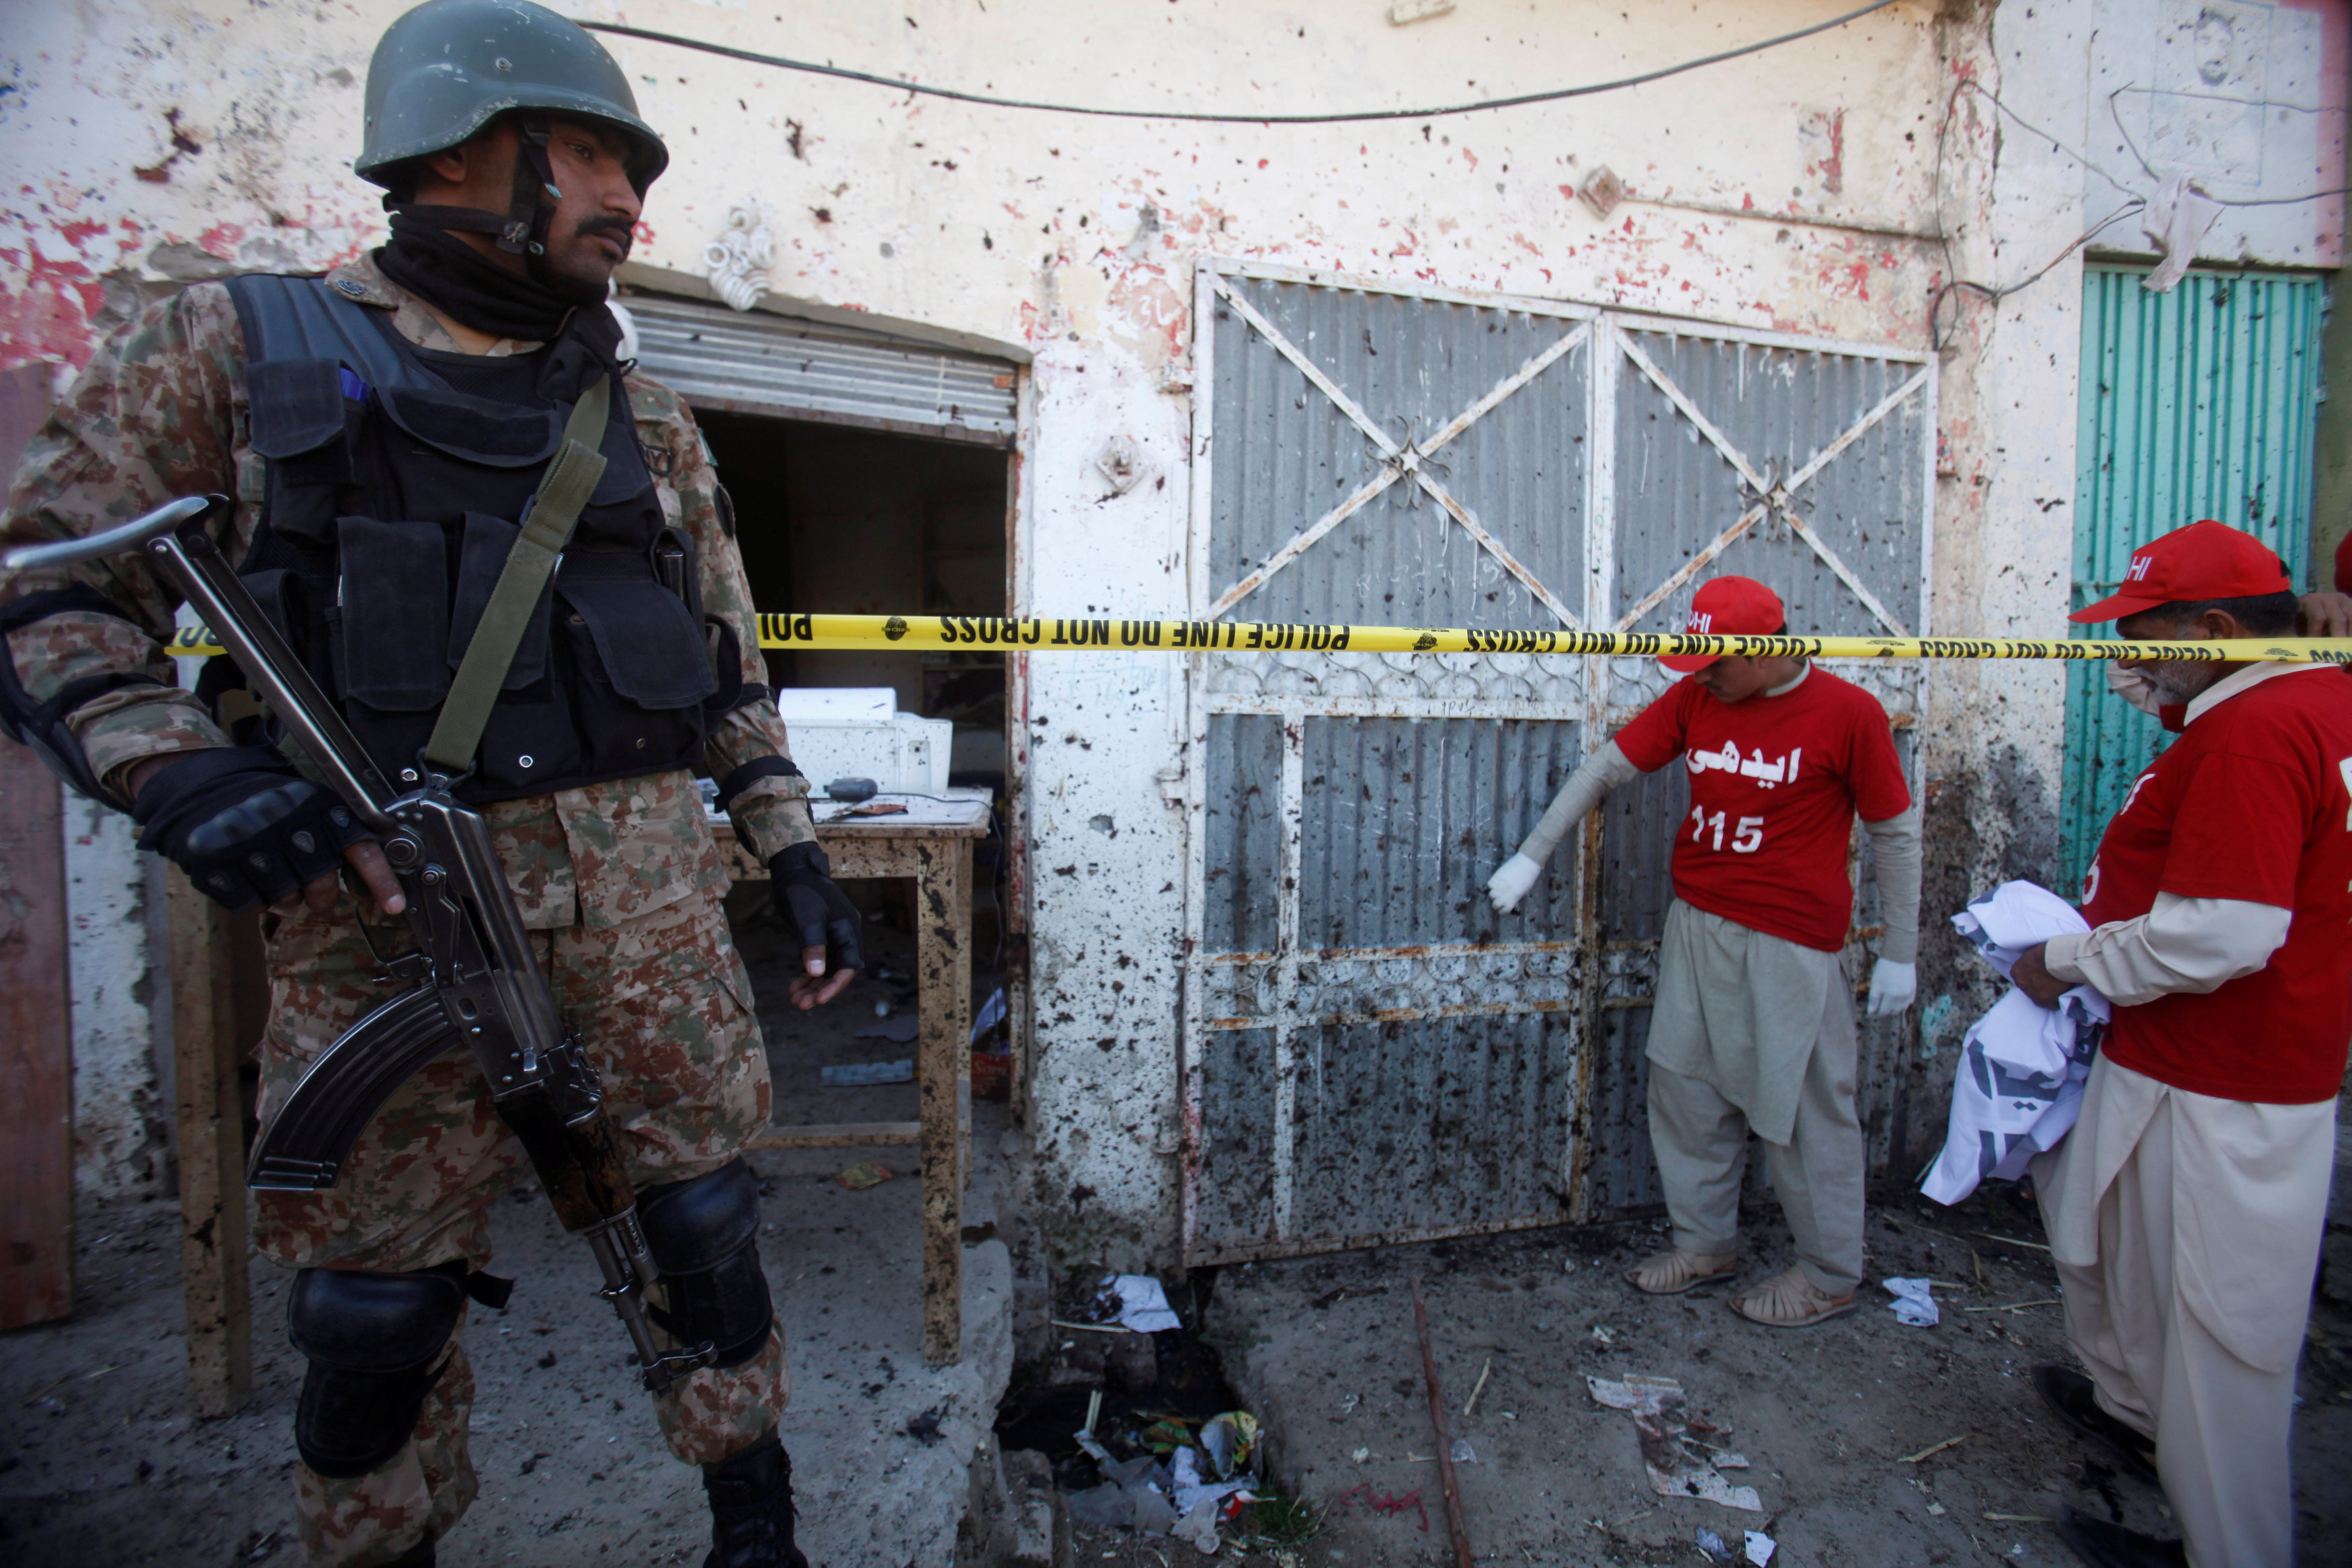 In Pictures: Attack on Pakistan court complex by Taliban militants